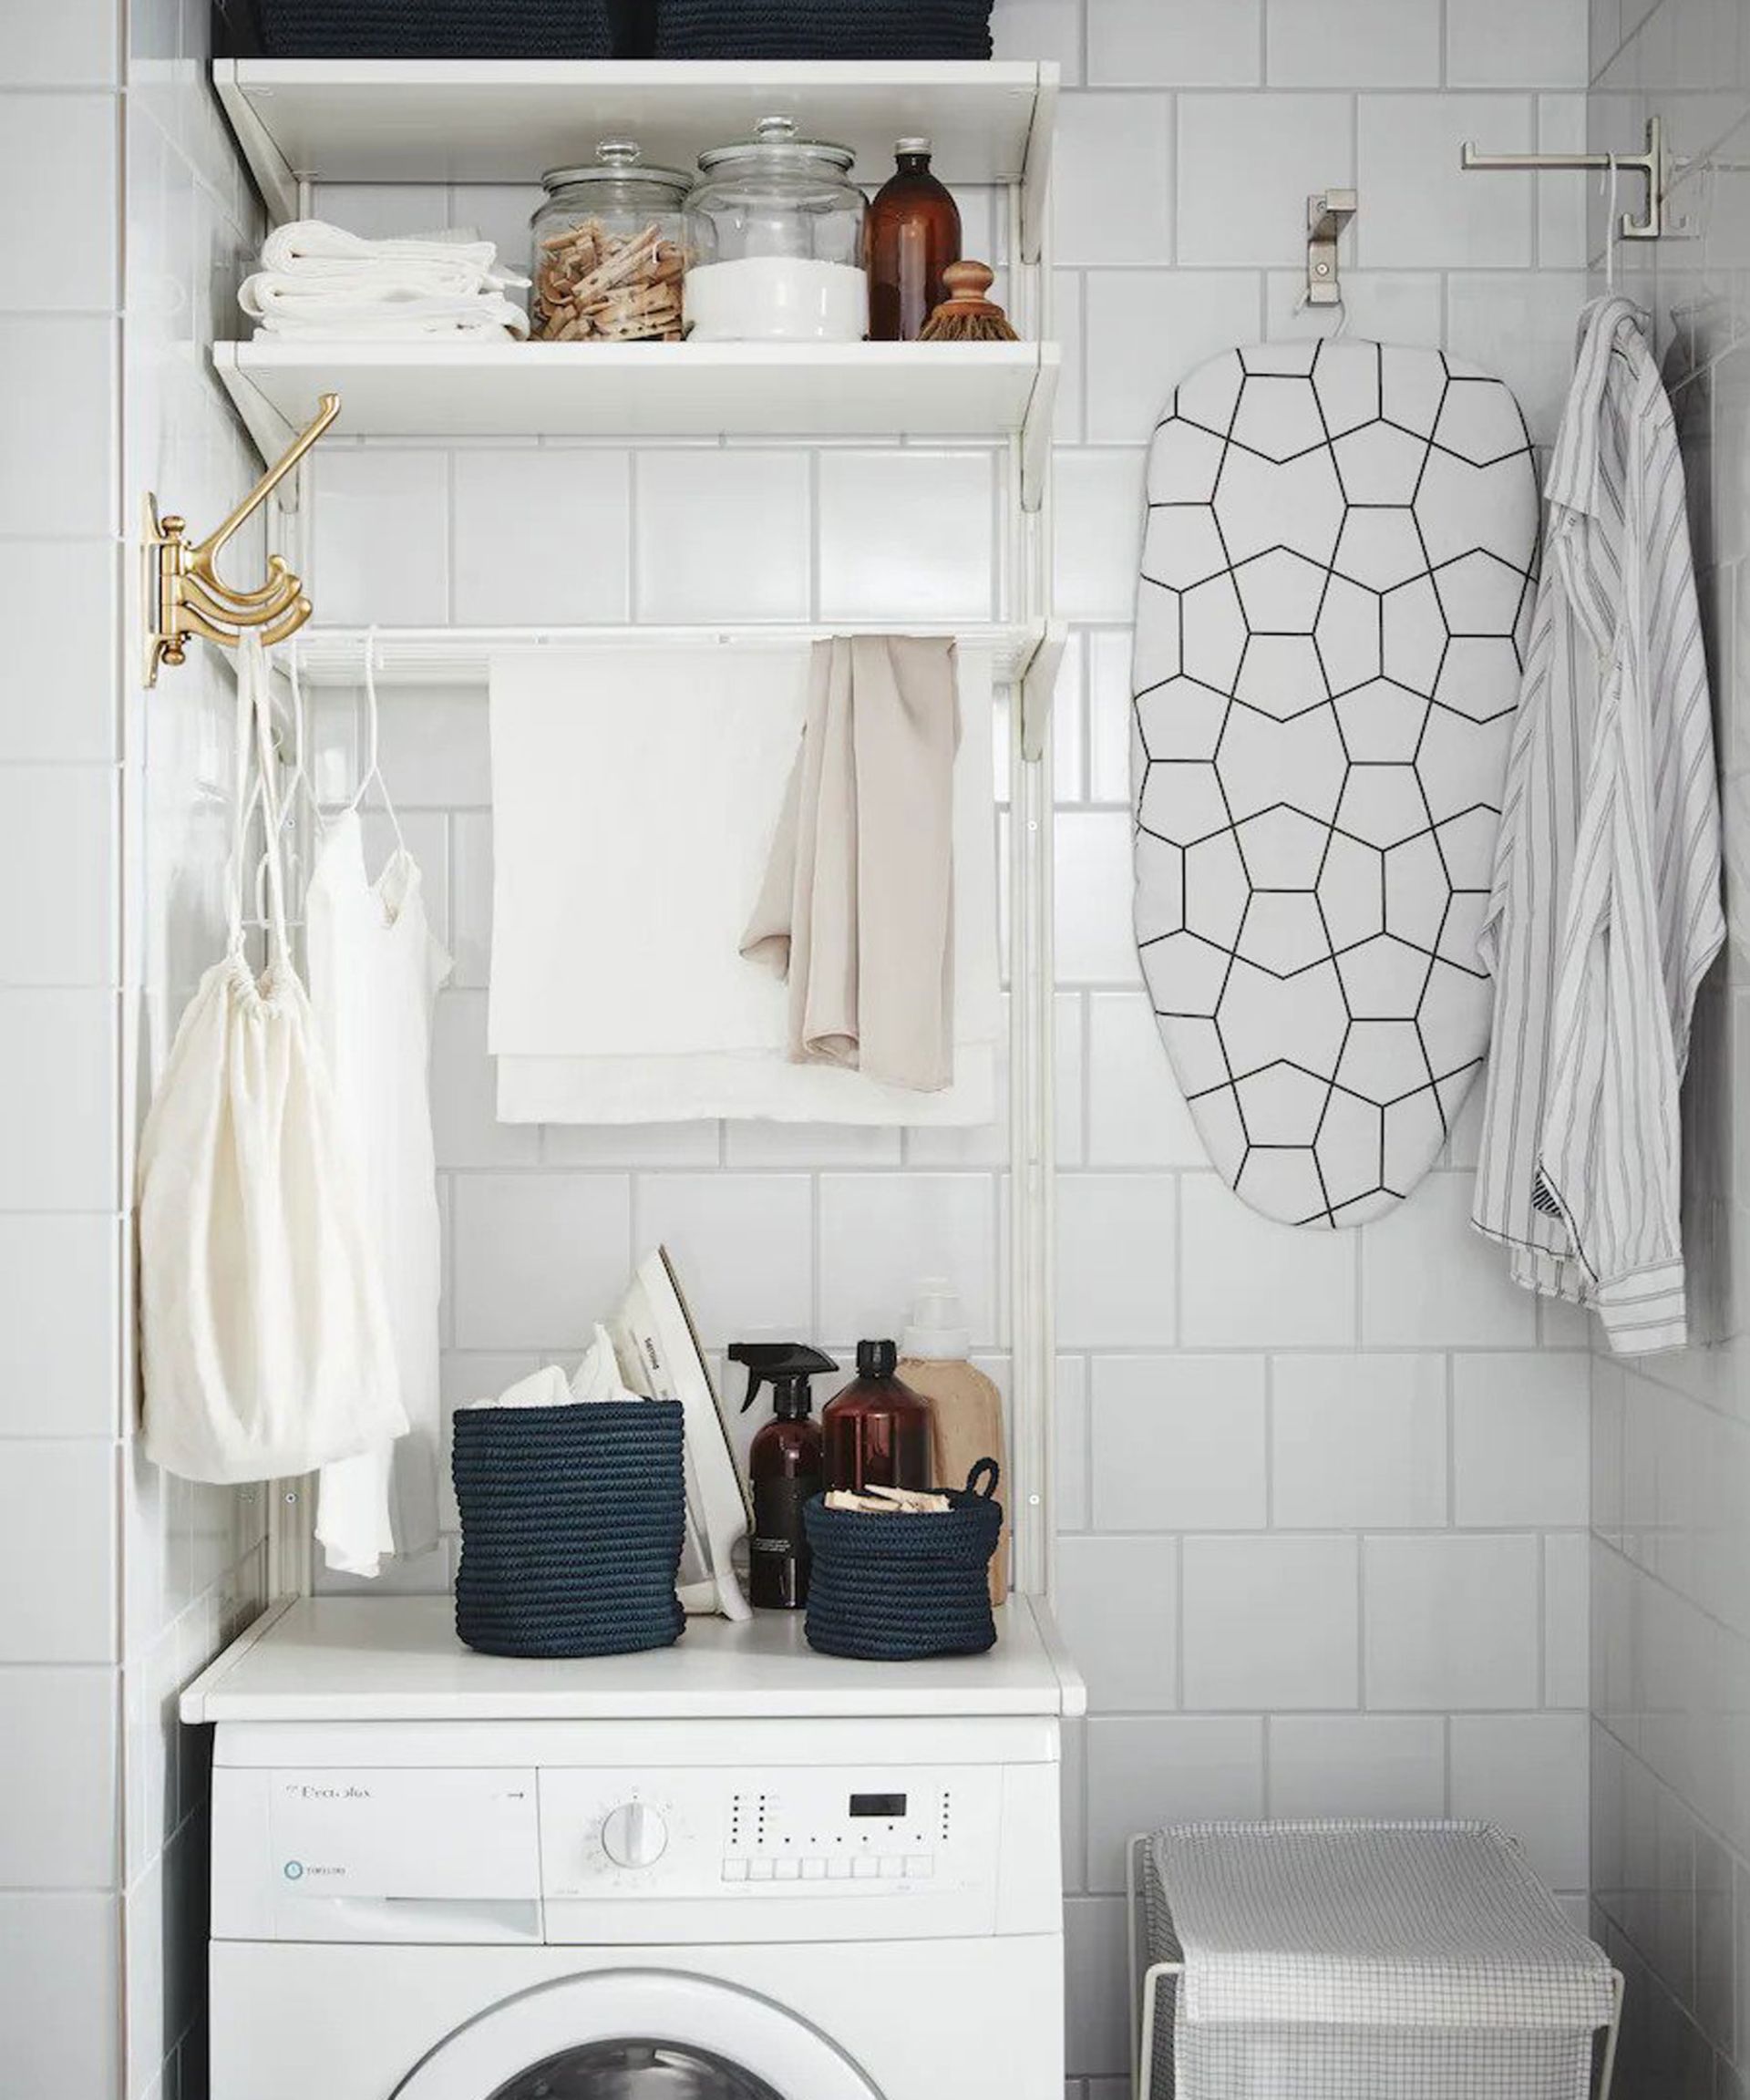 21 small laundry room ideas – tiny but mighty designs